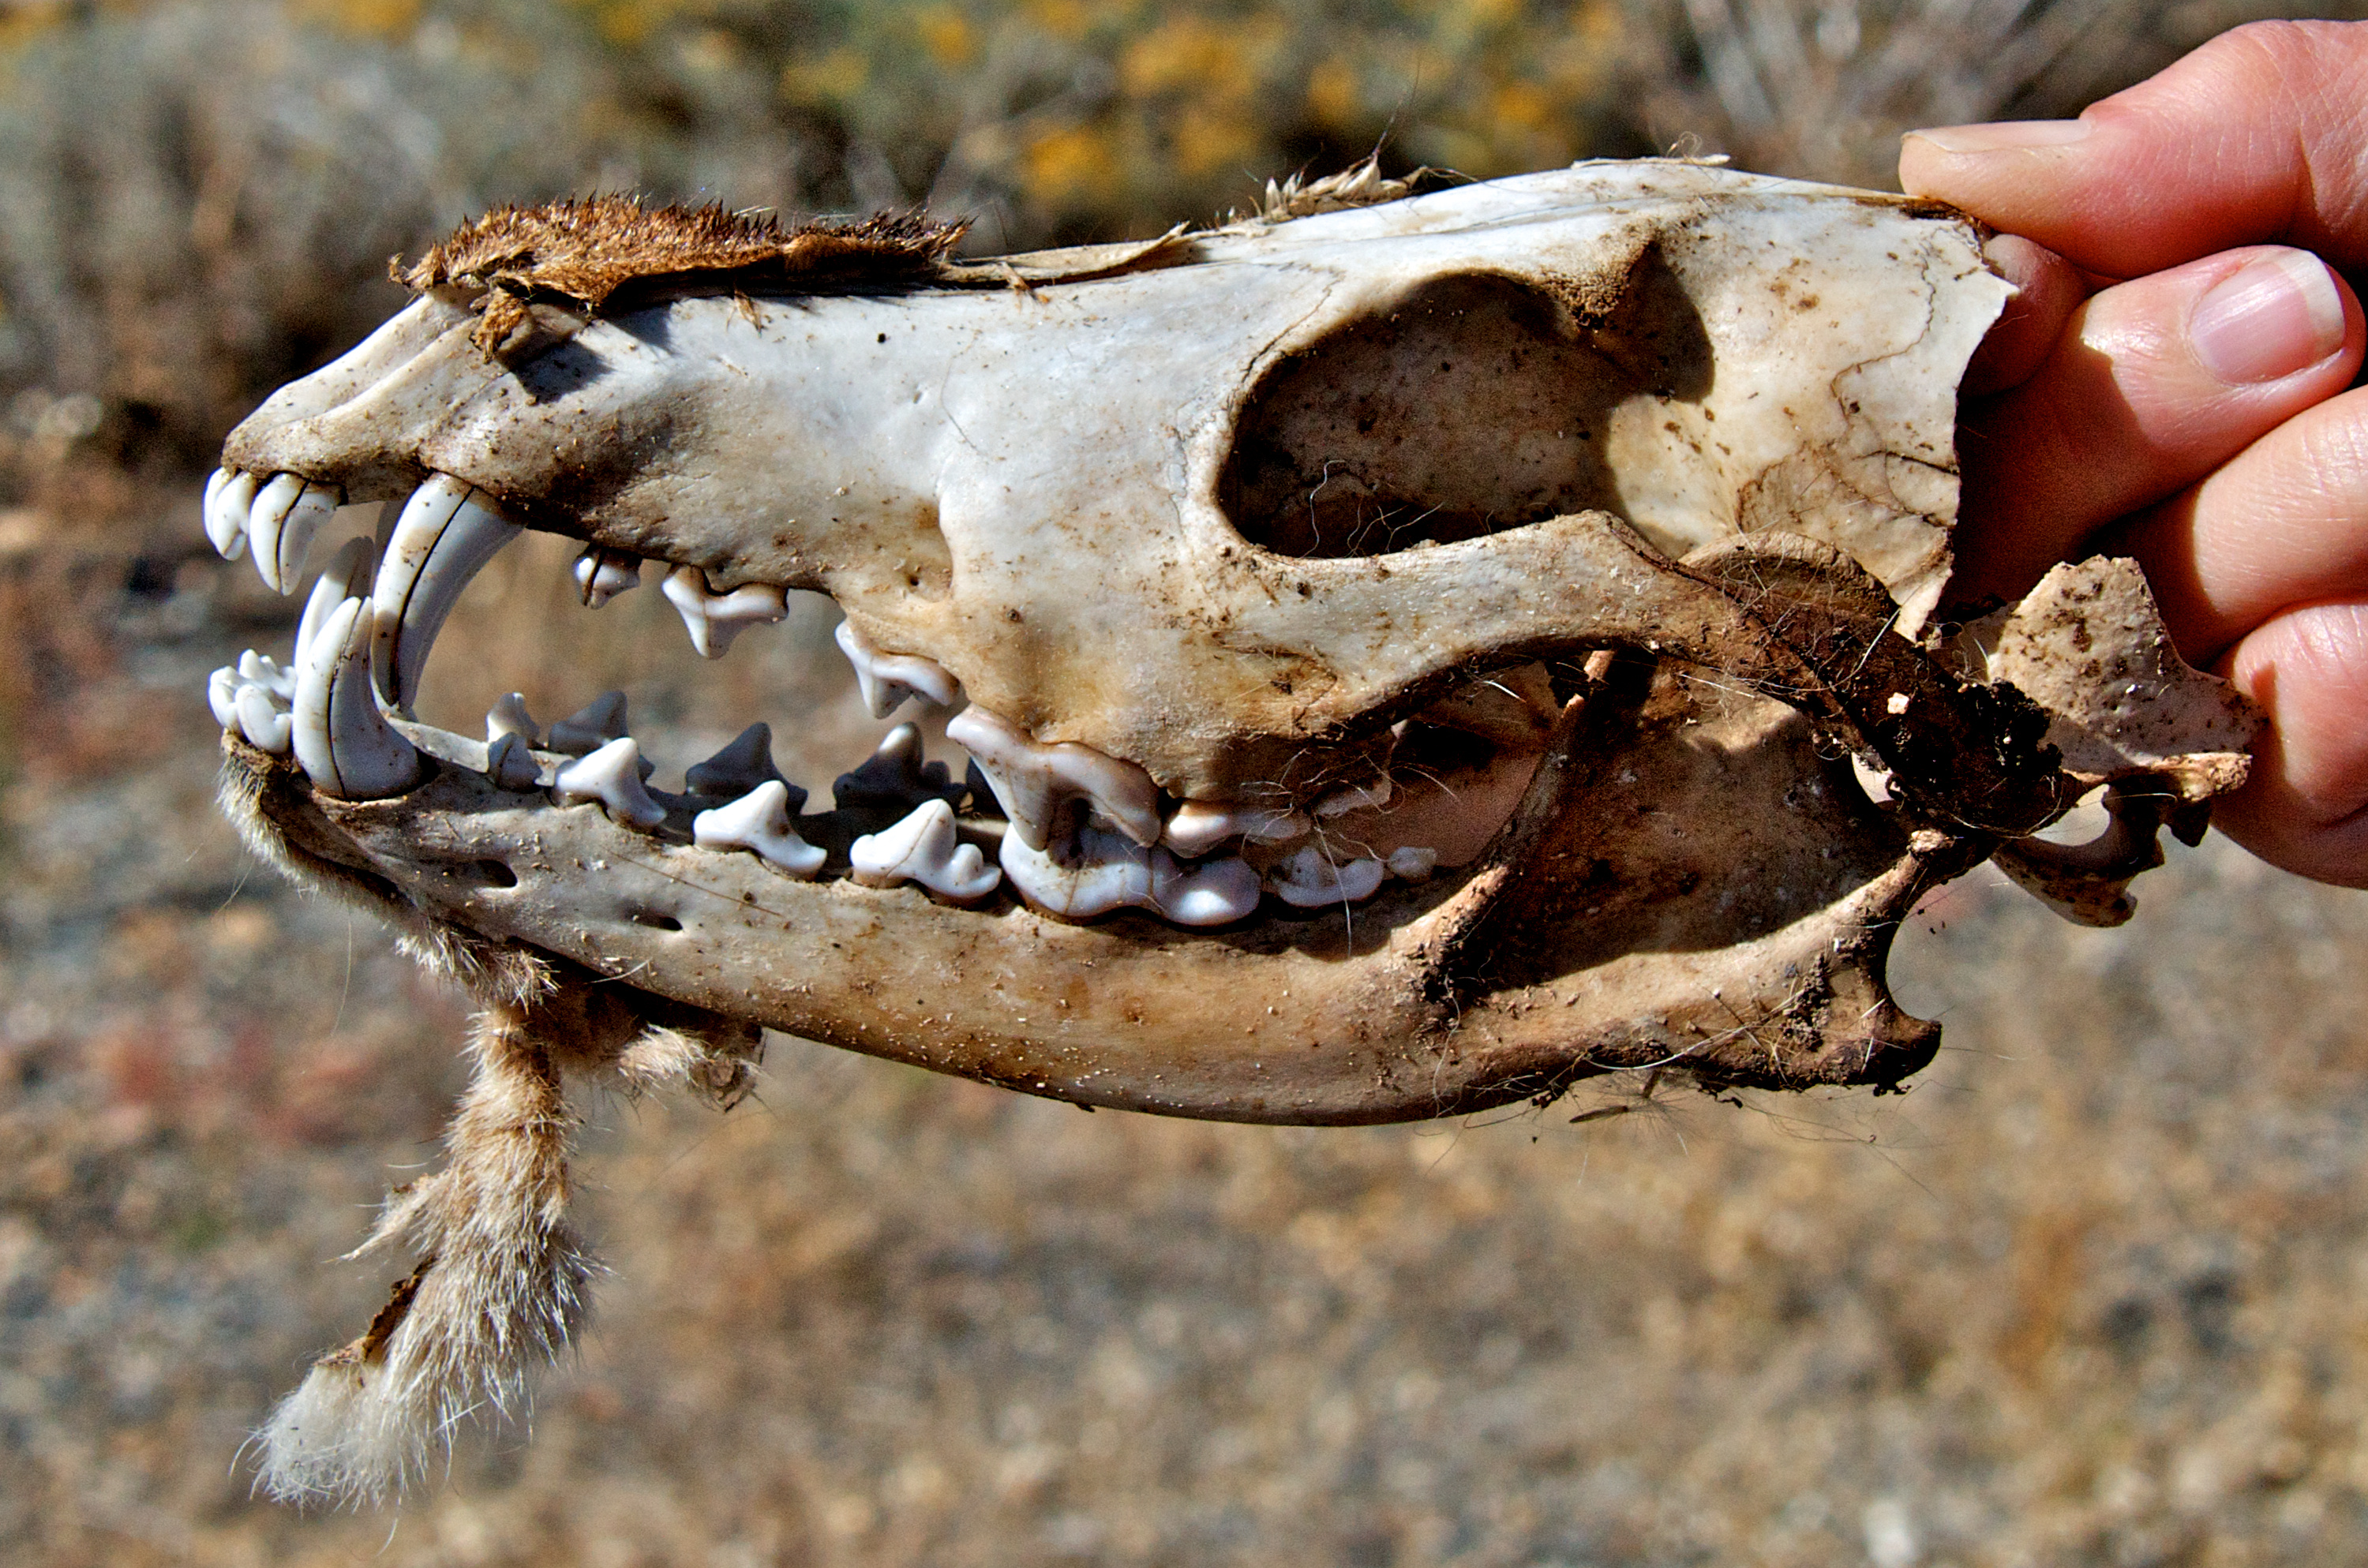 A person holds the posterior side of a coyote skull over a scrubland background. The large canine teeth of the coyote are visible.